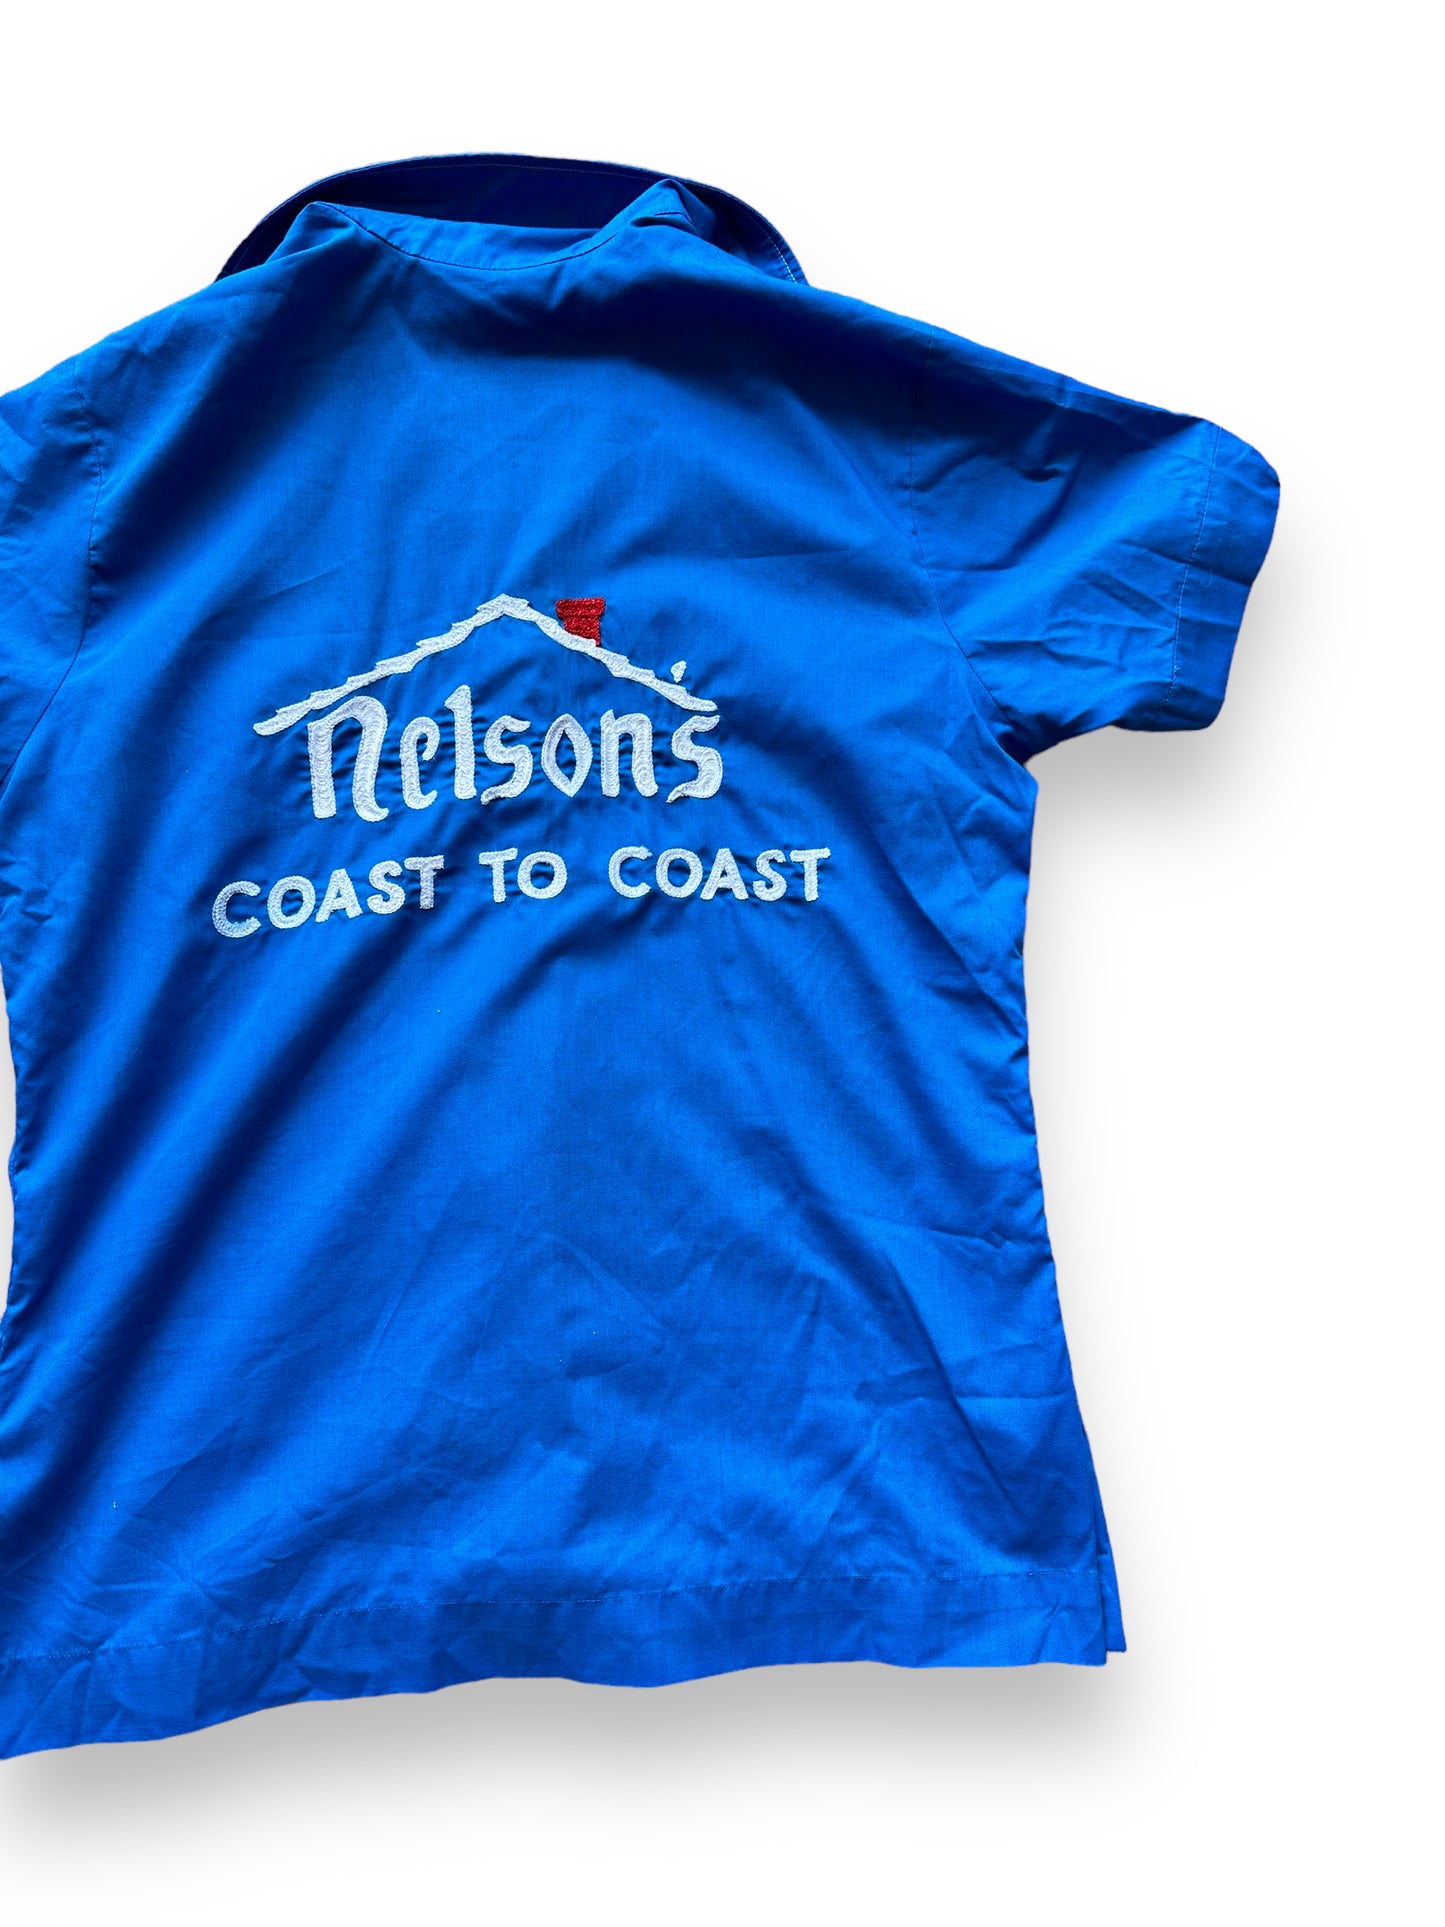 Back right of Vintage "Nelson's Coast to Coast" Chainstitched Bowling Shirt SZ S | Vintage Bowling Shirt Seattle | Barn Owl Vintage Seattle